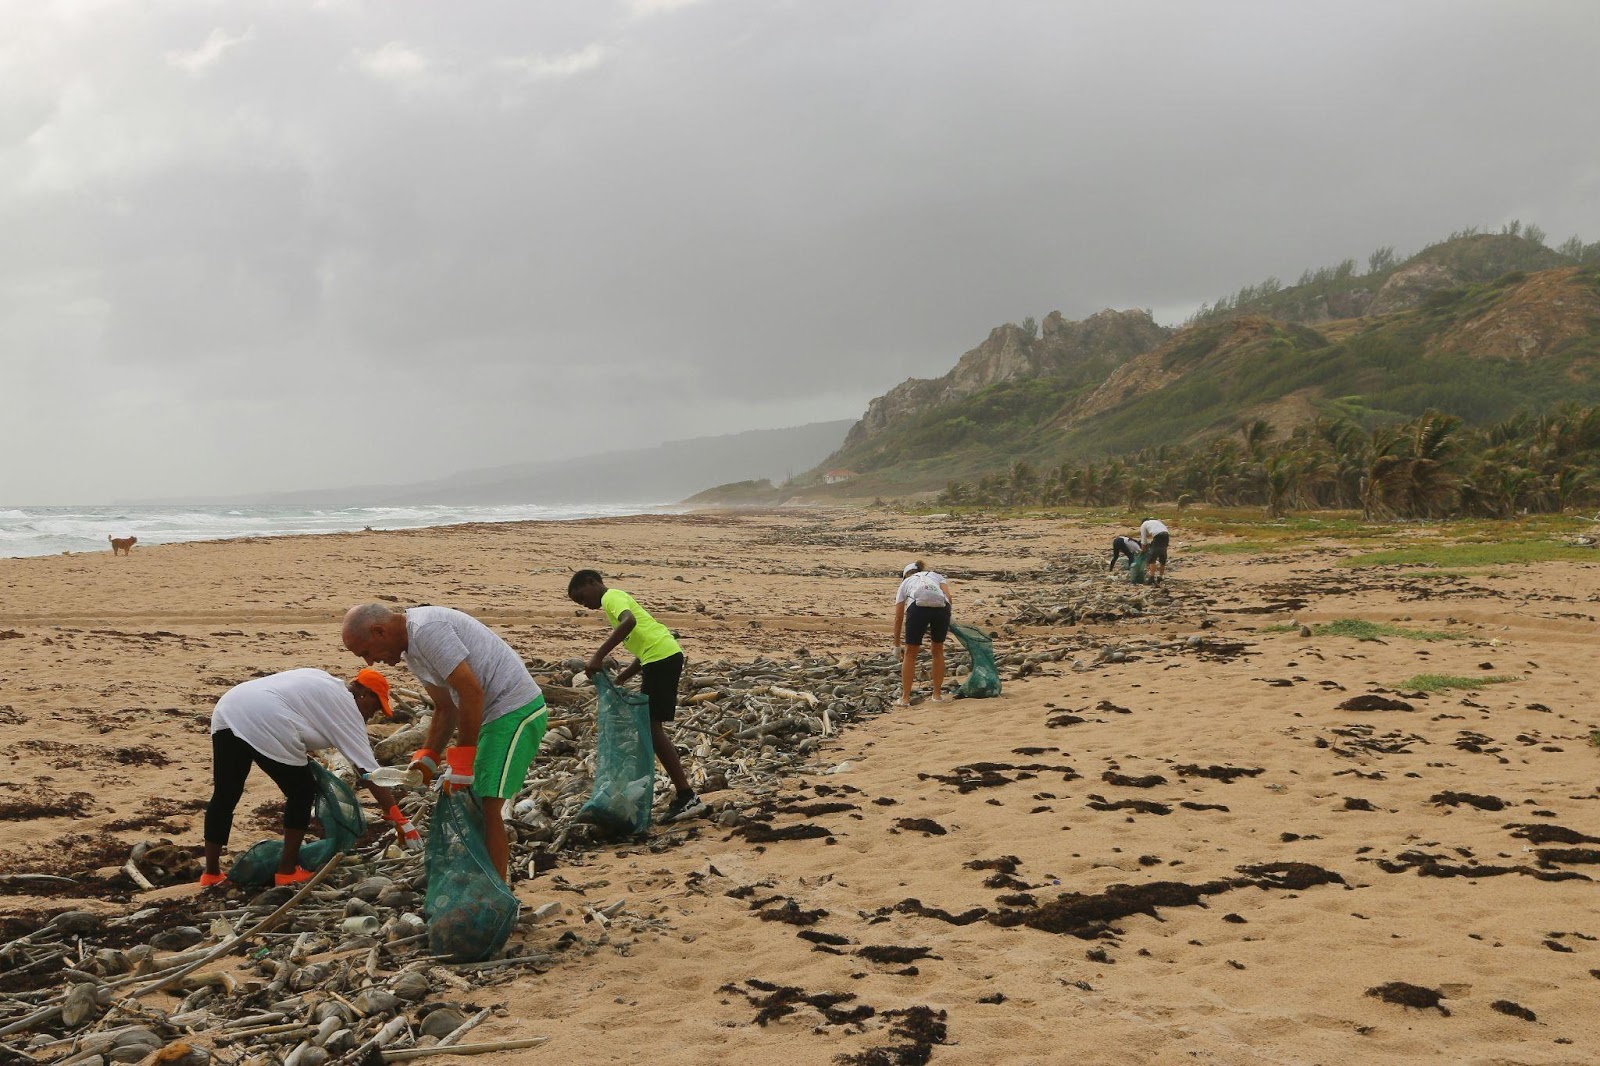 Volunteering sessions, like beach cleans, can help teams feel a sense of achievement from giving back, and count towards your company CSR objectives.